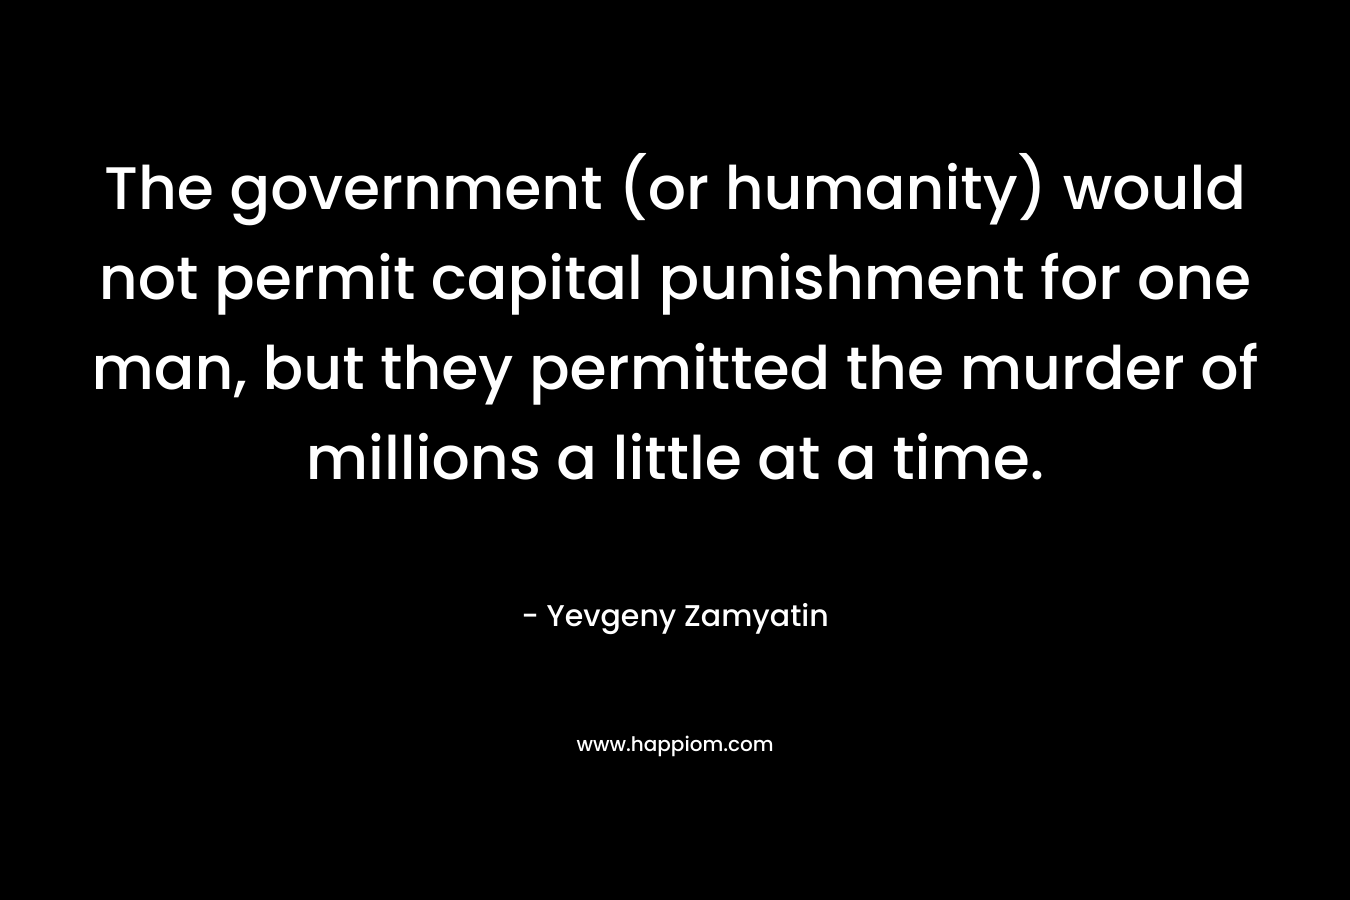 The government (or humanity) would not permit capital punishment for one man, but they permitted the murder of millions a little at a time. – Yevgeny Zamyatin